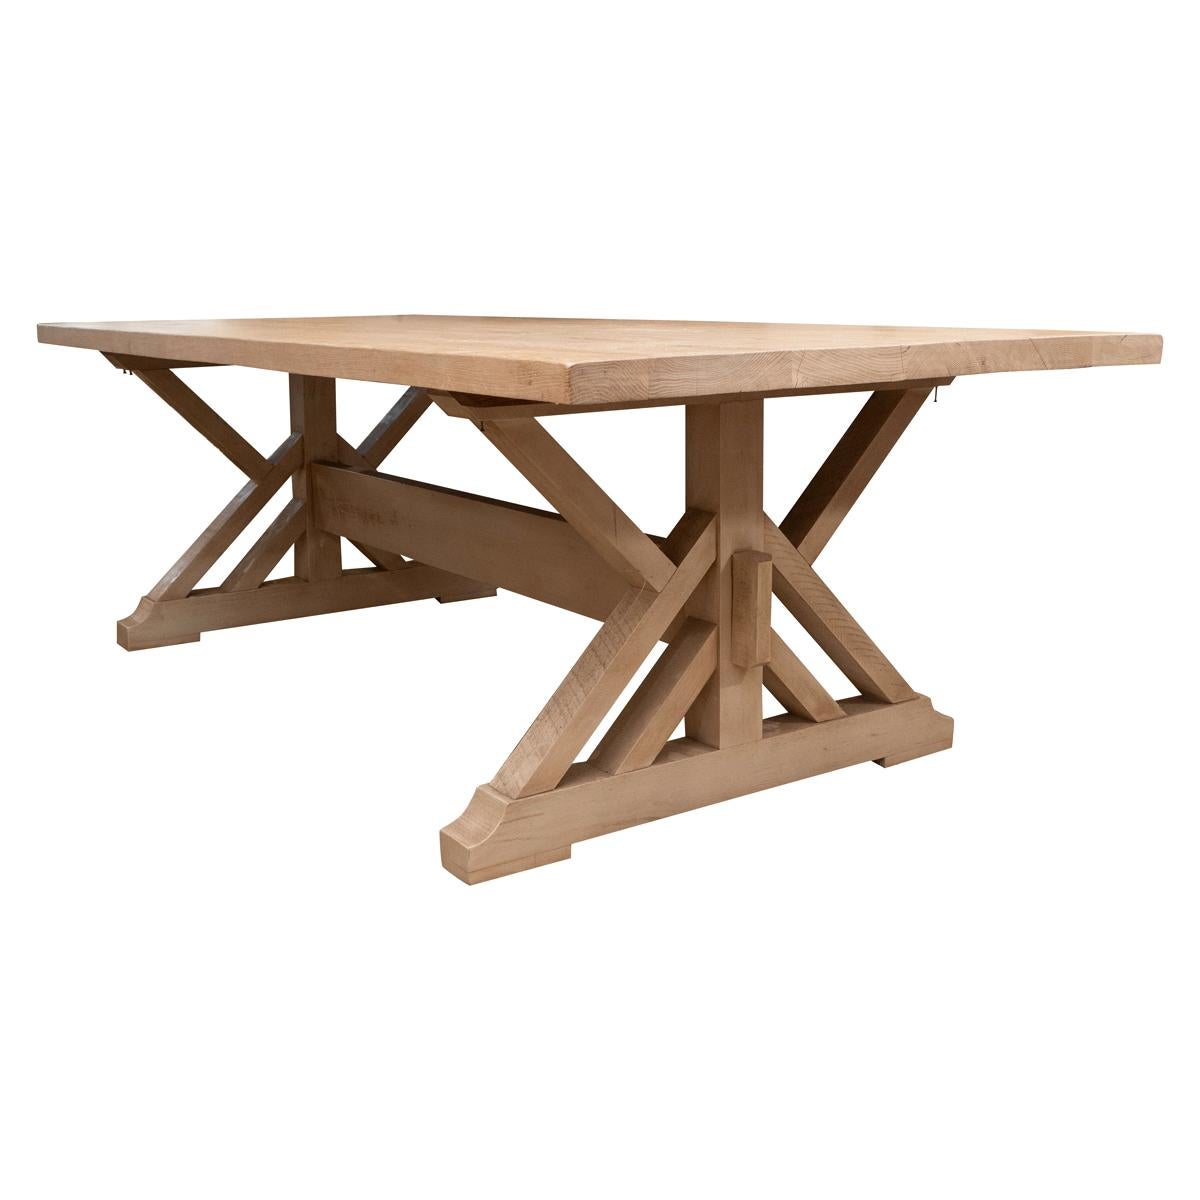 Pickled Pine Farm Table with Trestle Base